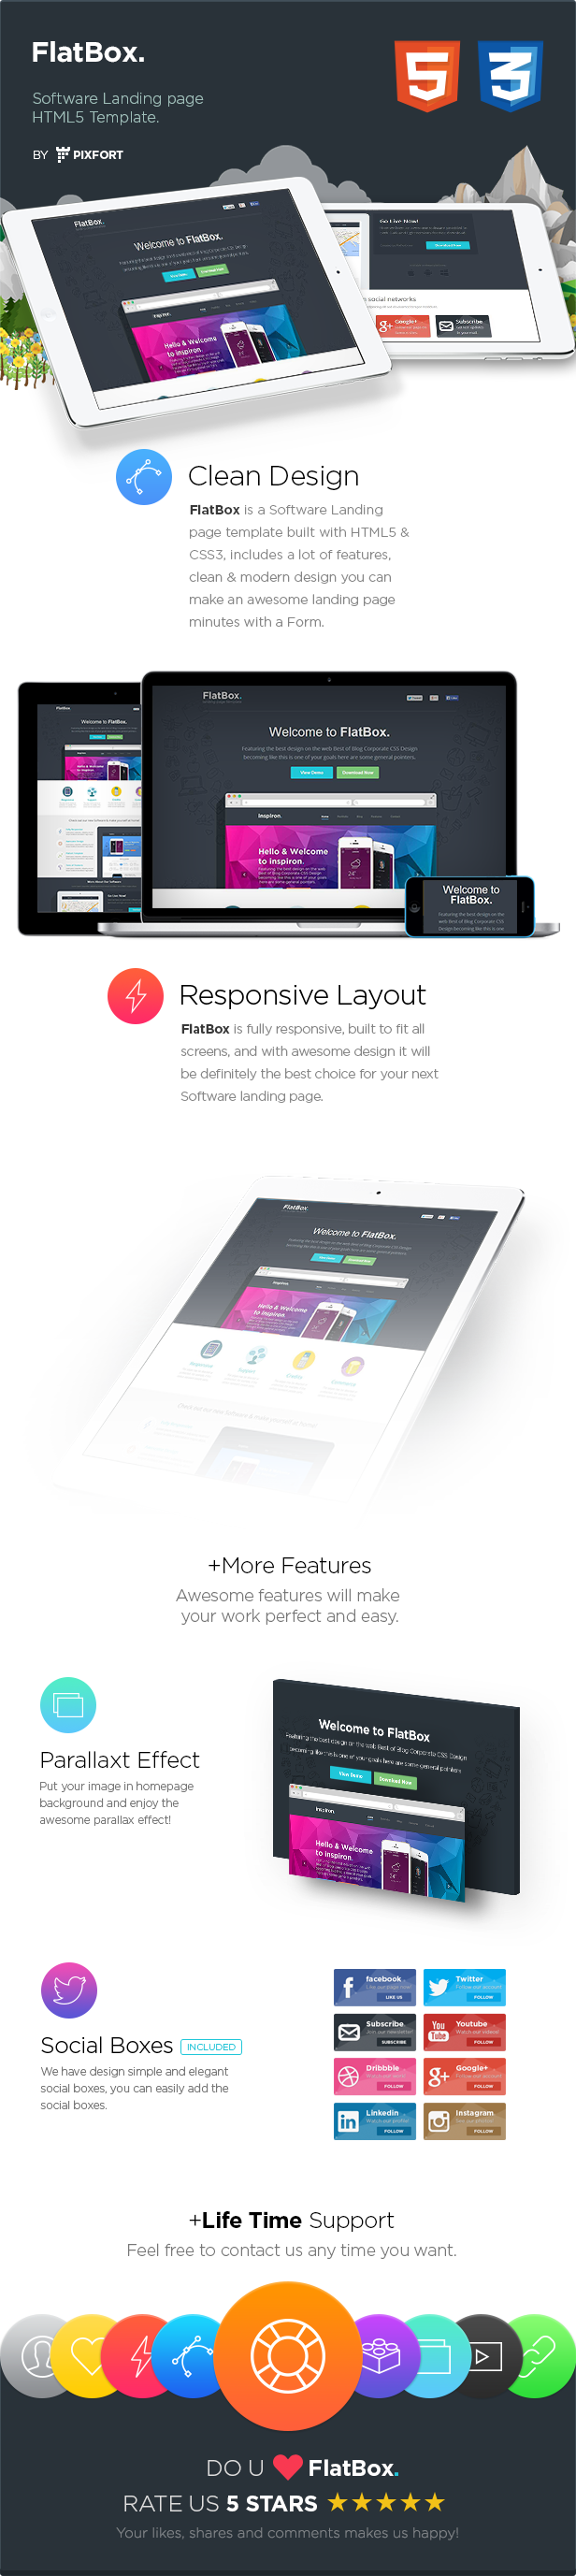 FlatBox -  Software Landing Page Template - 5